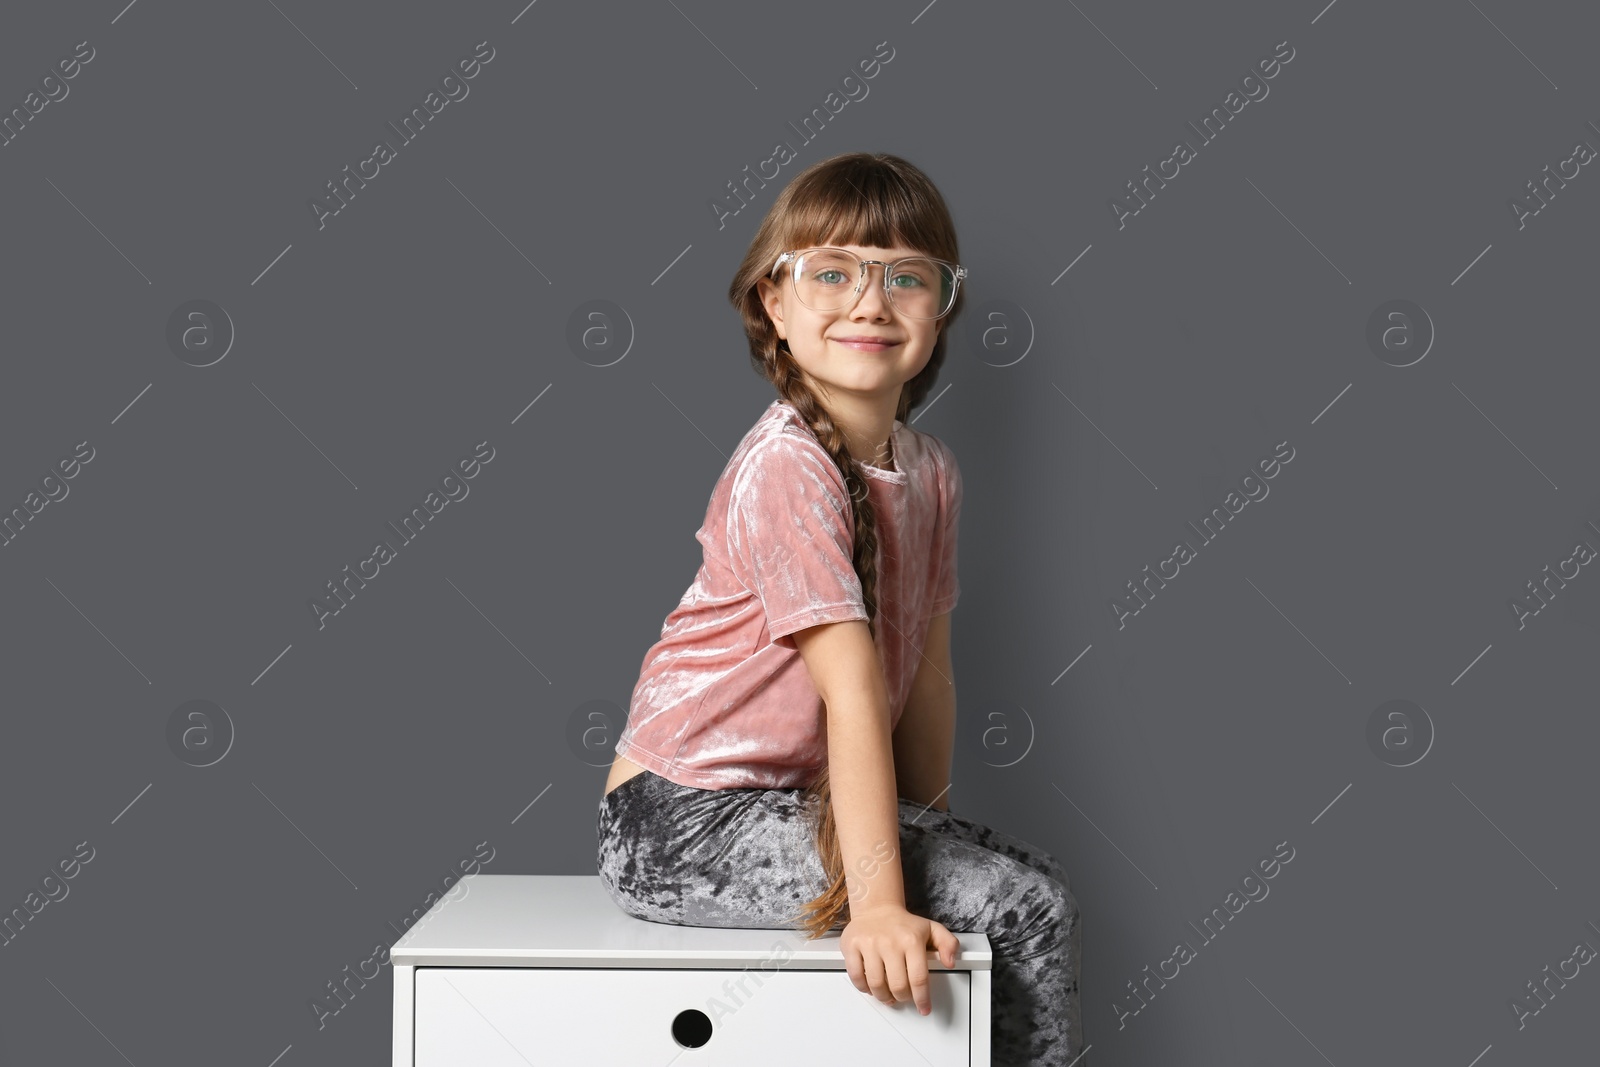 Photo of Cute little girl sitting on chest of drawers unit near gray wall